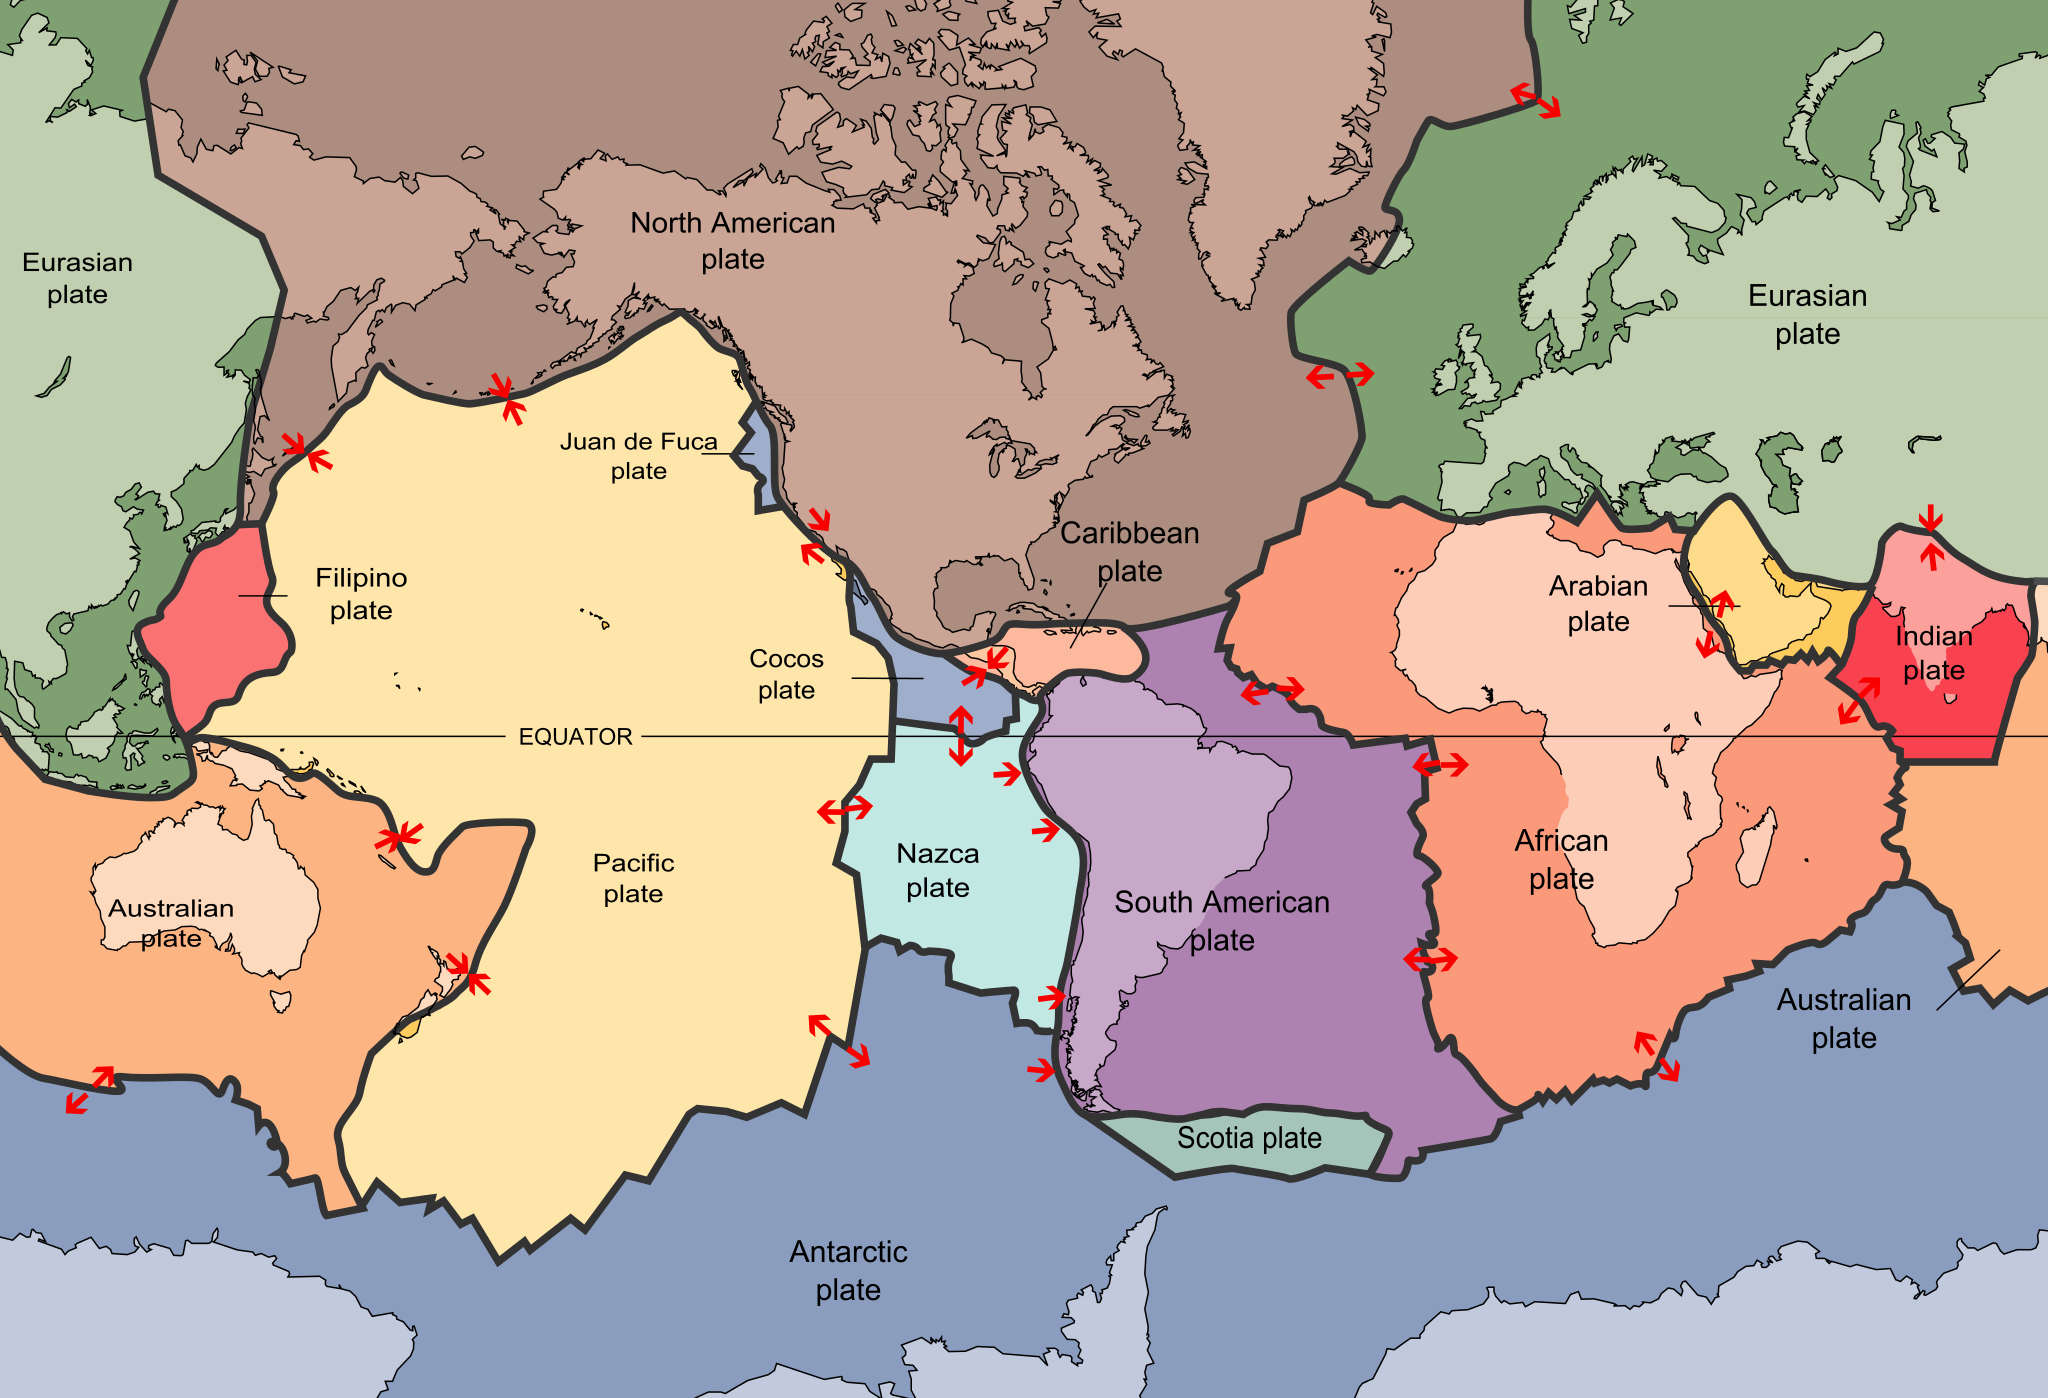 World map with the largest tectonic plates outlined and filled in with a different color for each plate: the Eurasian Plate is colored green, the North American Plate is gray, the Australian Plate is orange, the Filipino Plate is red, the Pacific Plate is yellow, the Juan de Fuca and Cocos Plates are blueish purple, the Nazca Plate is light blue, the Antarctic Plate is dark blue, the Scotia Plate is medium blue, the Caribbean plate is pinkish orange, the South American Plate is purple, the African Plate is dark orange, the Arabian Plate is yellow, and the Indian Plate is dark red.